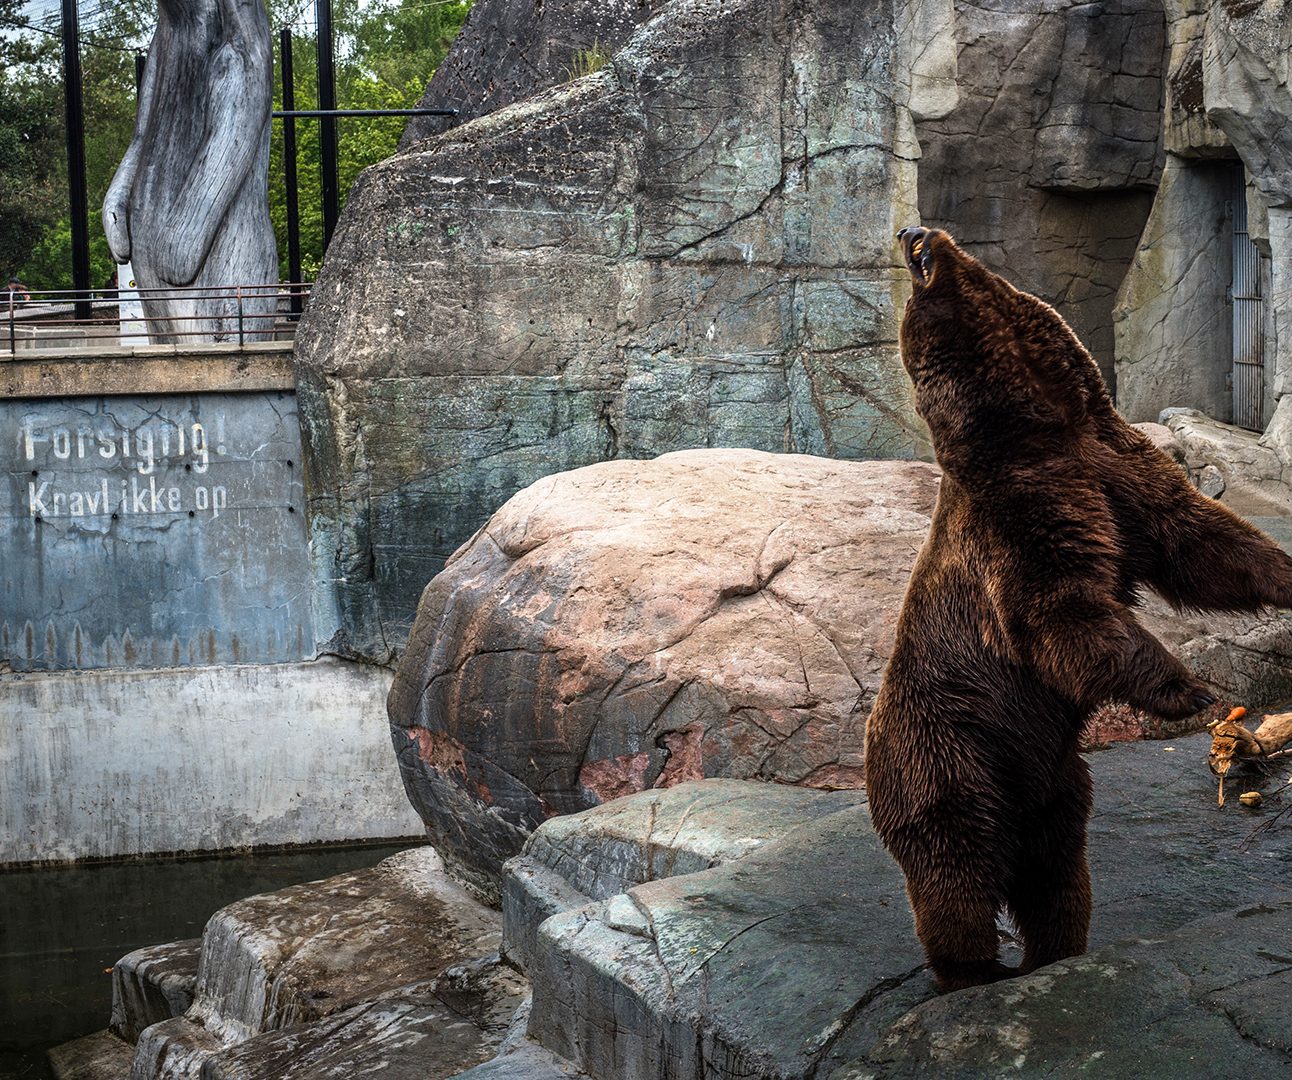 A bear stands on its hind legs twisting its neck, in a zoo enclosure